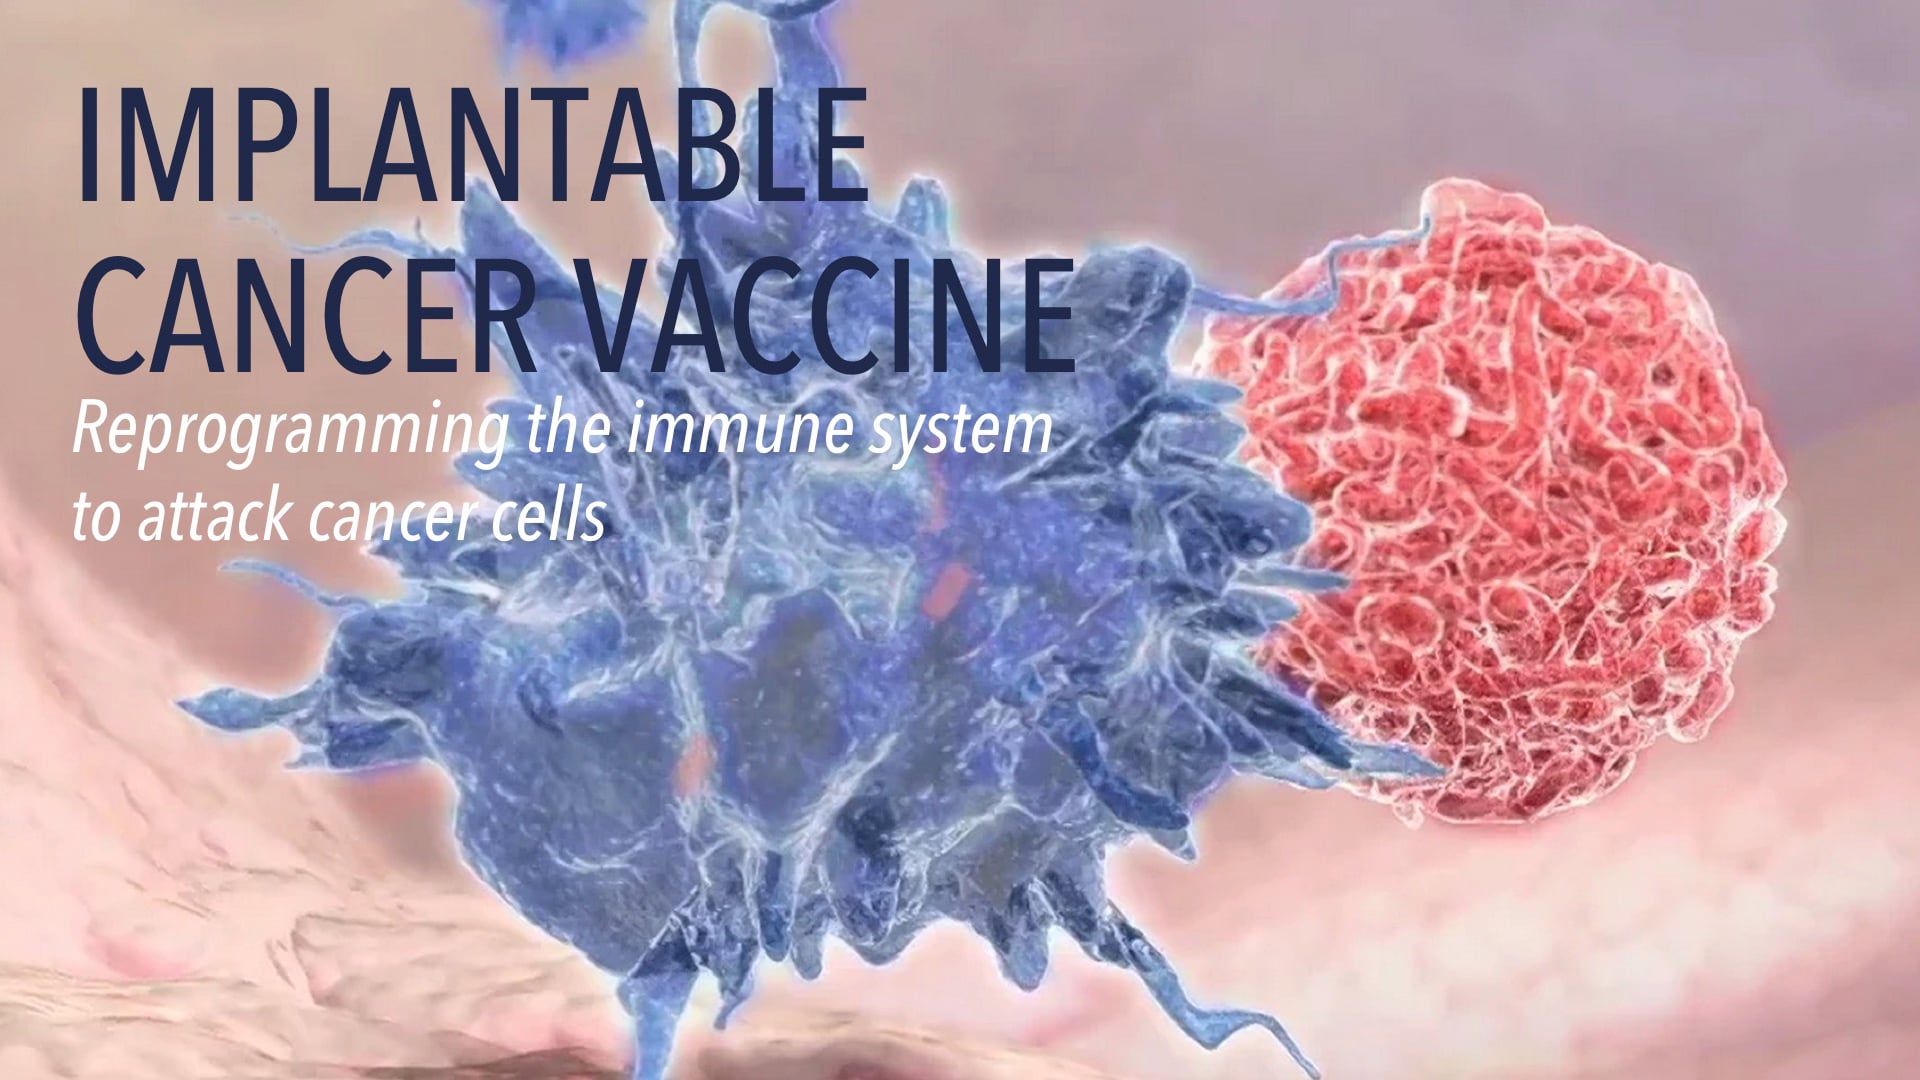 Implantable Cancer Vaccine